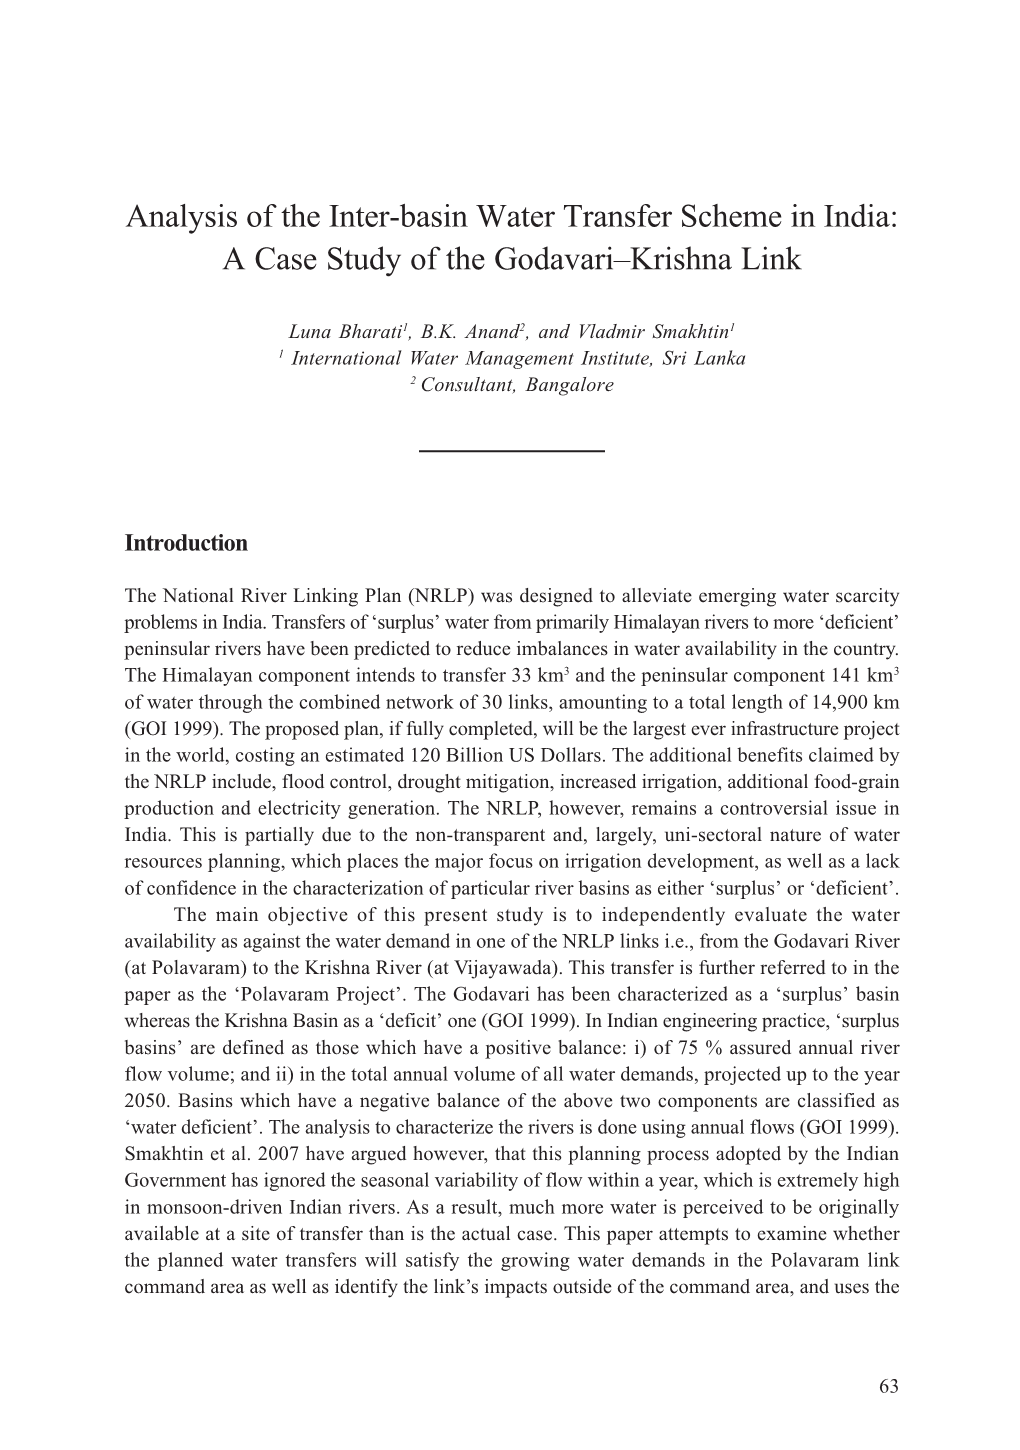 Analysis of the Inter-Basin Water Transfer Scheme in India: a Case Study of the Godavari–Krishna Link